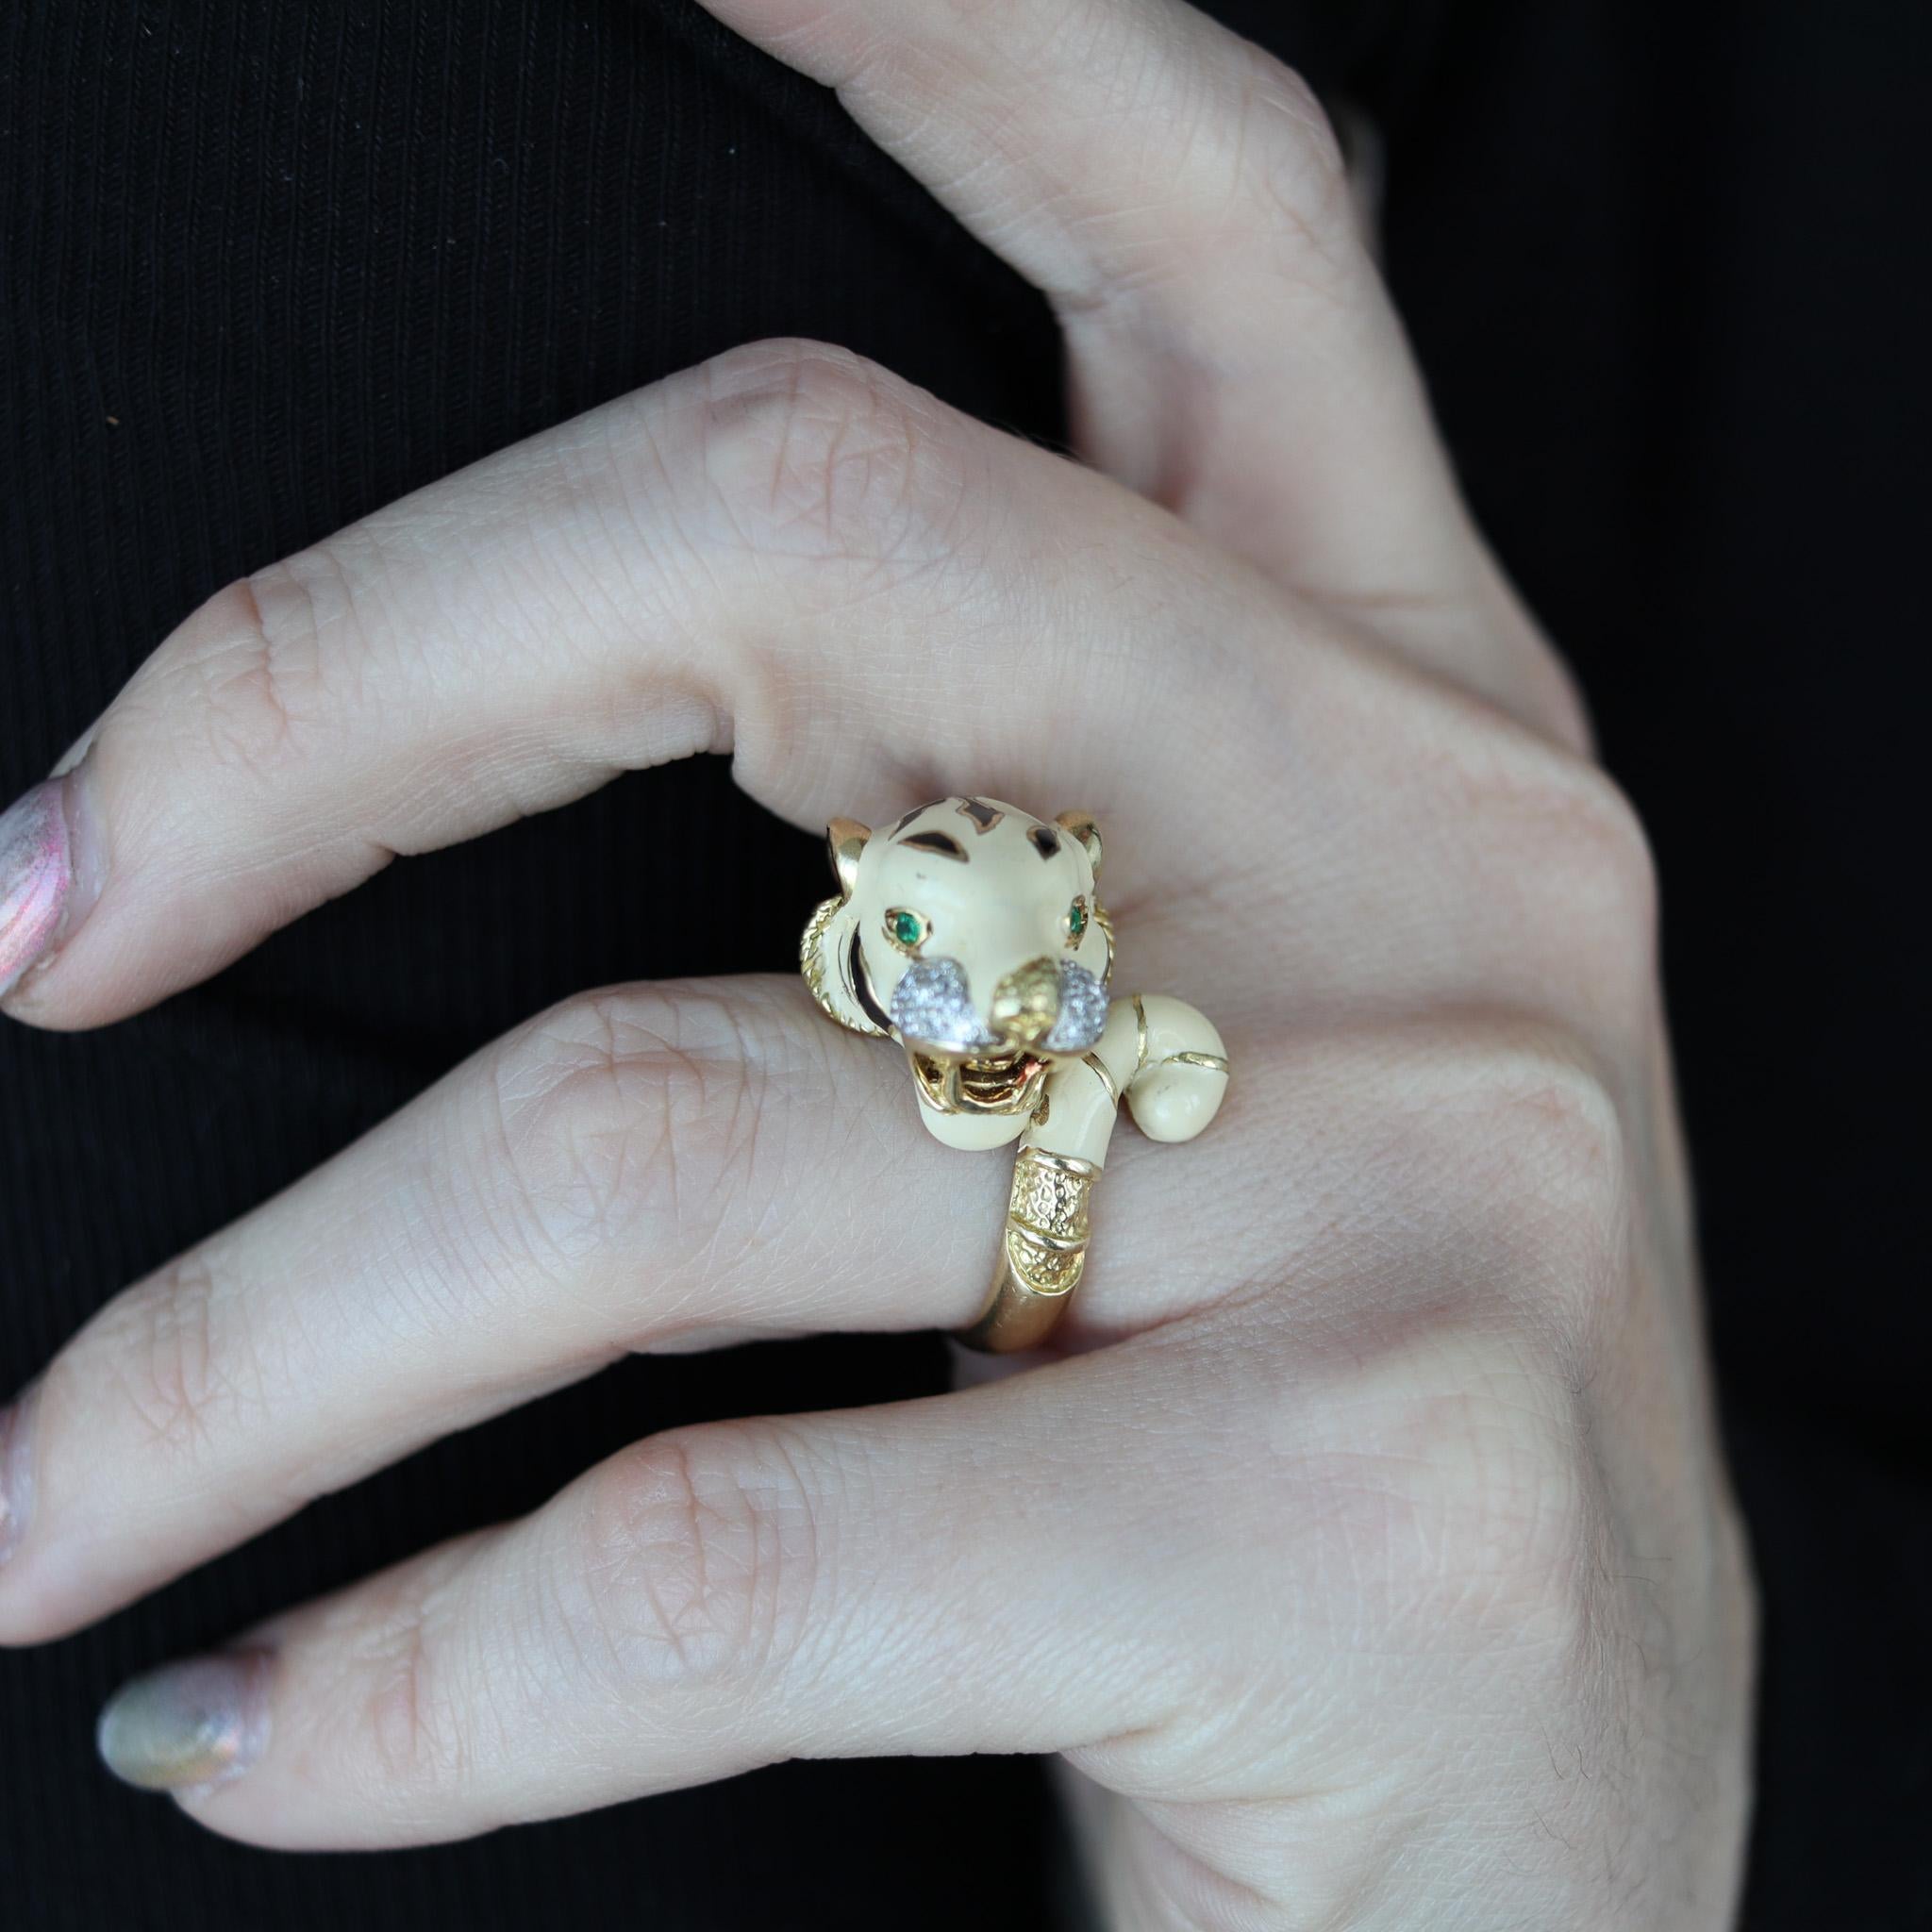 Tiger ring designed by Roberto Legnazzi.

Beautiful cocktail in the shape of a roaring tiger, created in Italy at the atelier of Roberto Legnazzi. This colorful ring has been carefully crafted in solid yellow gold of 18 karats with high polished